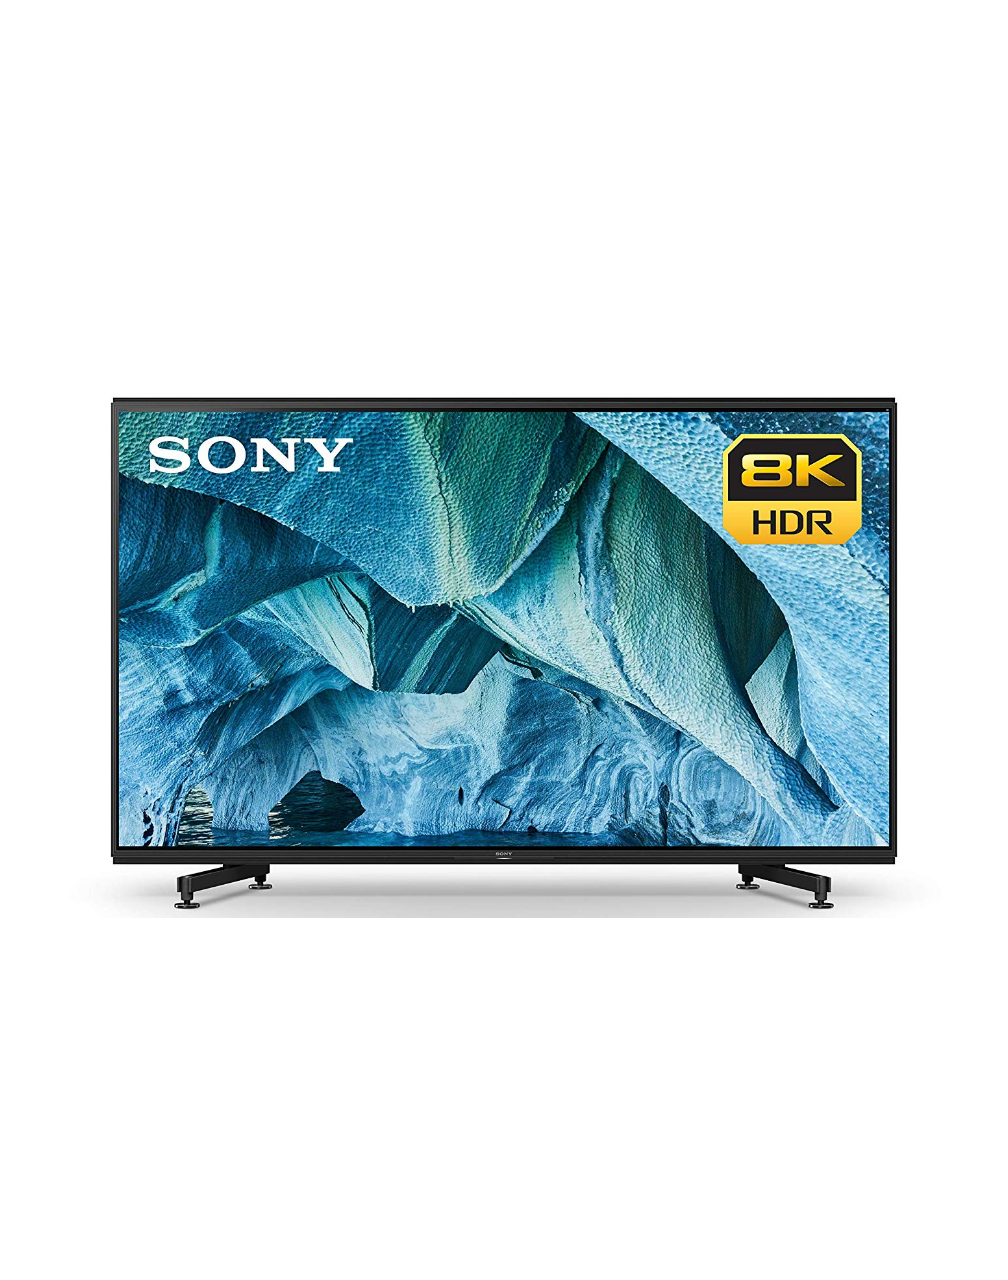 Sony XBR-65A8G 65 Inch TV: BRAVIA OLED 4K Ultra HD Smart TV with HDR